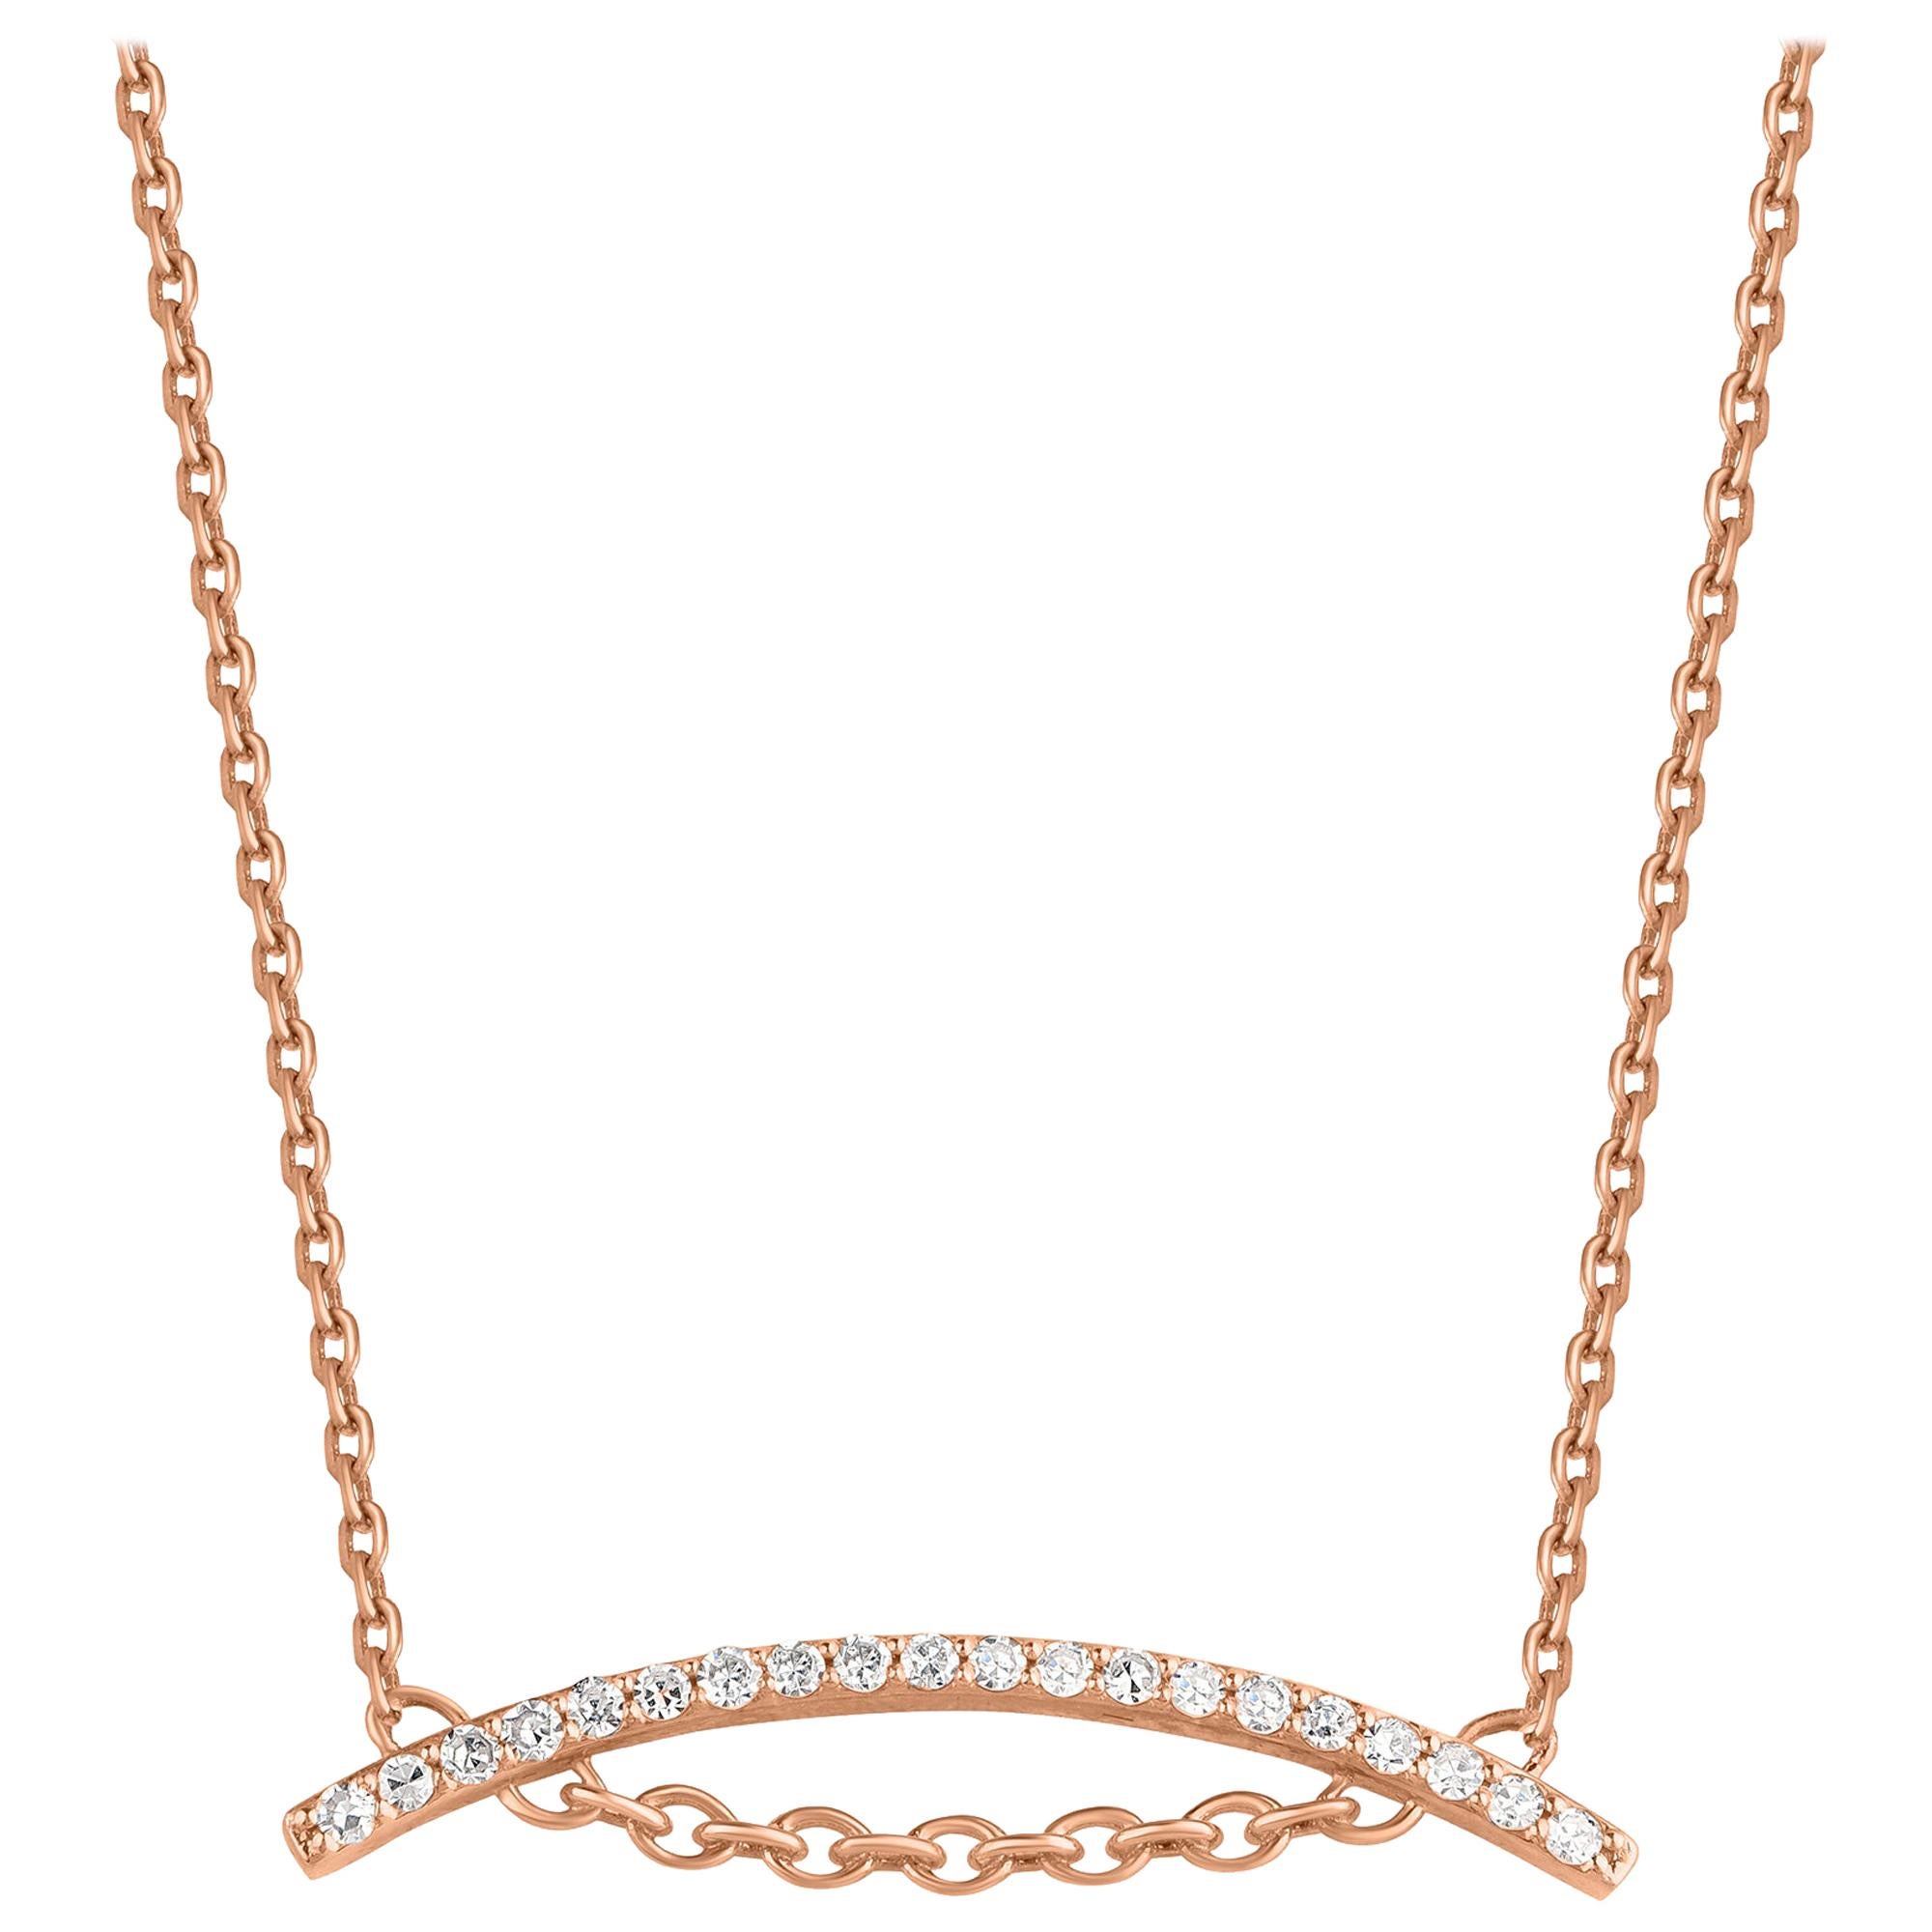 TJD 0.20 Carat Diamond 18 Karat Rose Gold Curved Bar Necklace with 18 inch Chain